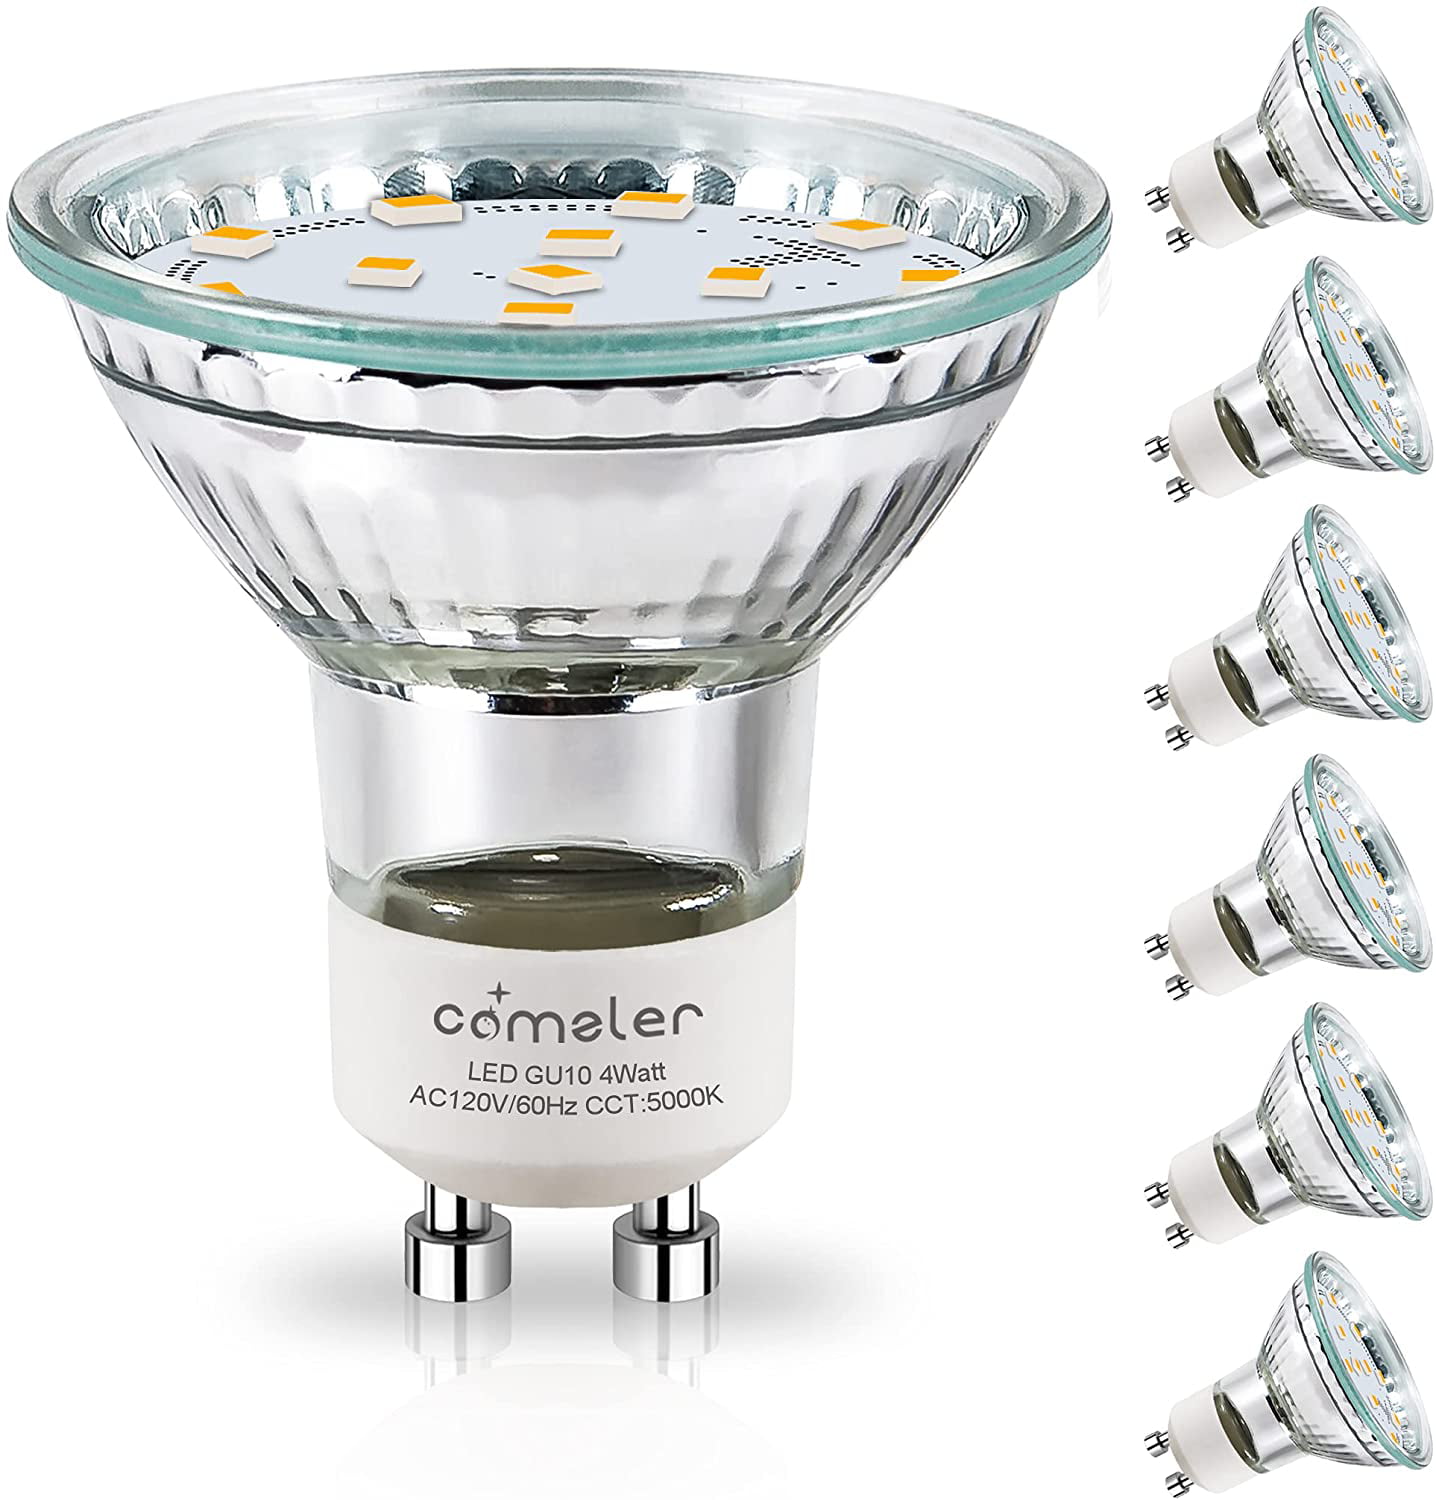 GU10 LED Bulbs, GU10 Light Bulb 5000K Daylight White, Replacement Recessed Track 50W Halogen Equivalent, 4W 400LM 110° Wide Beam, Non-dimmable, Pack of 6 - Walmart.com